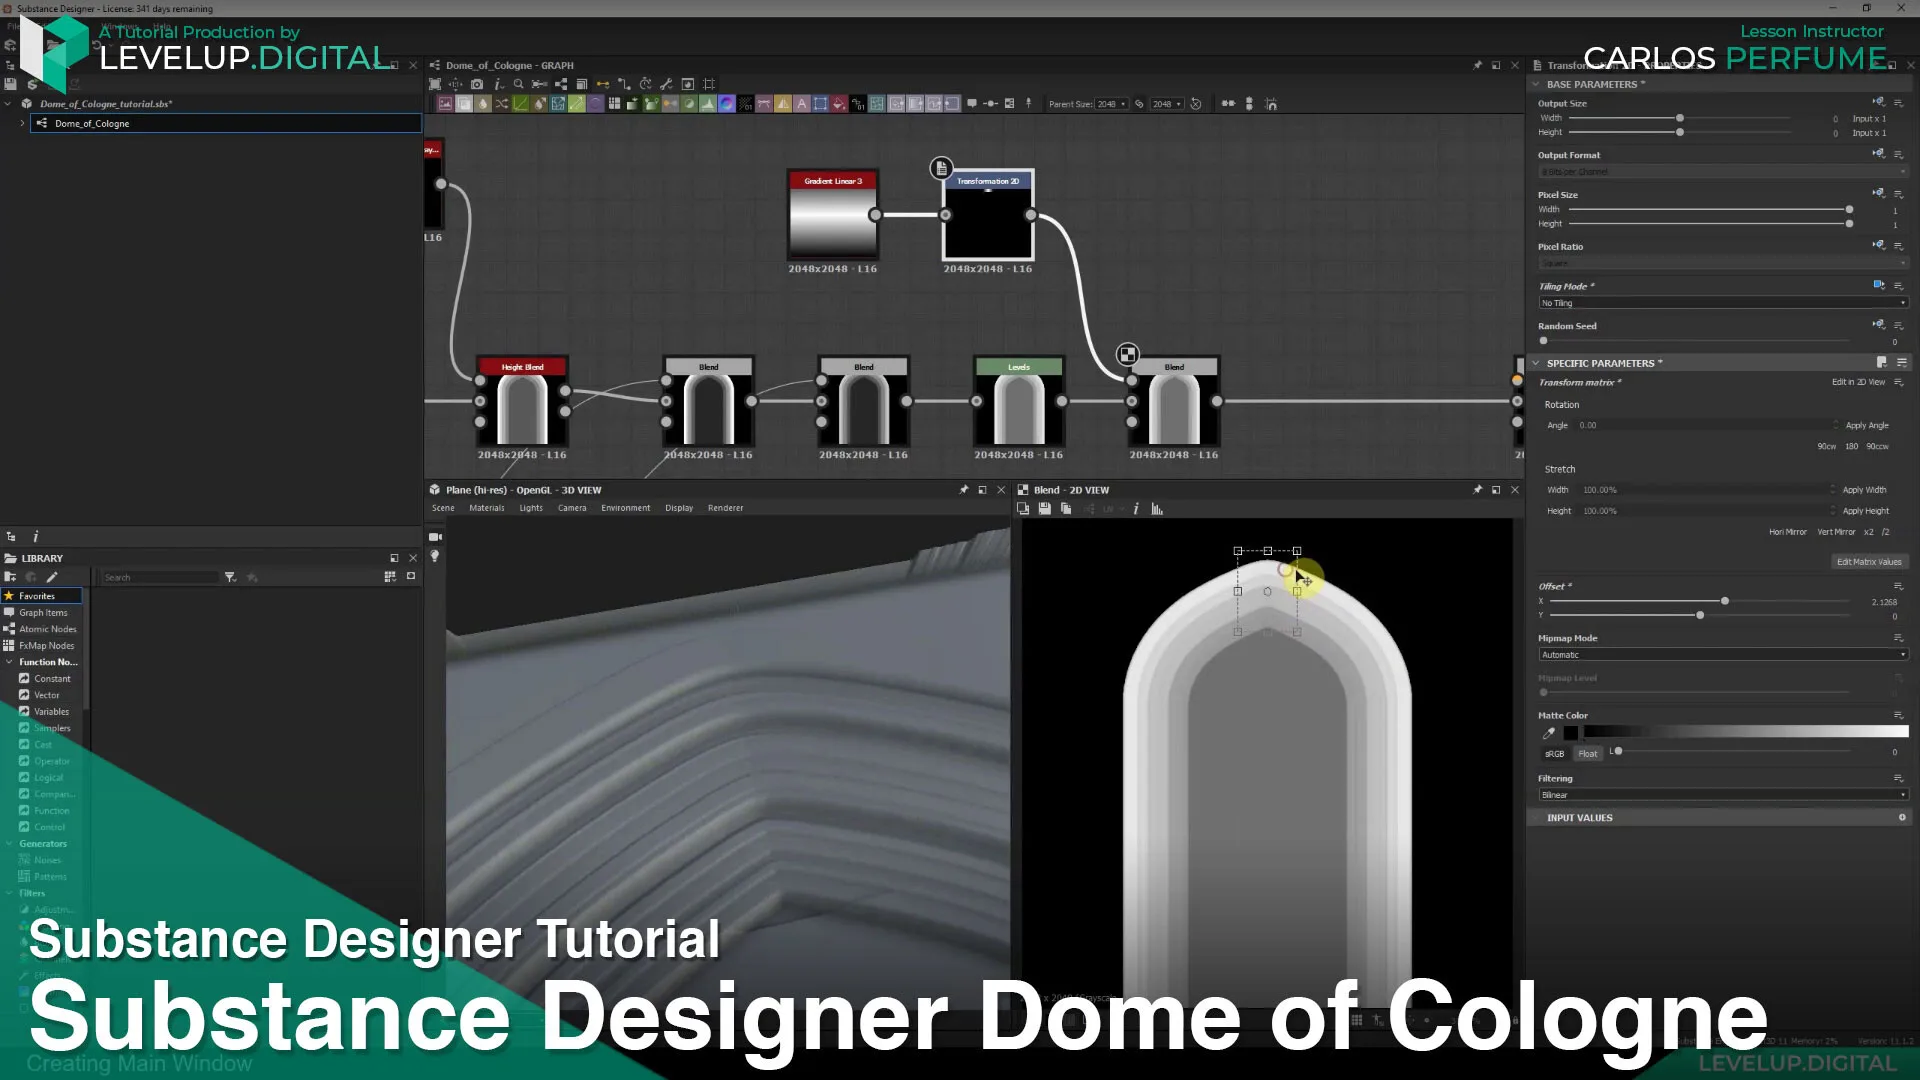 Substance Designer Dome of Cologne | Carlos Perfume